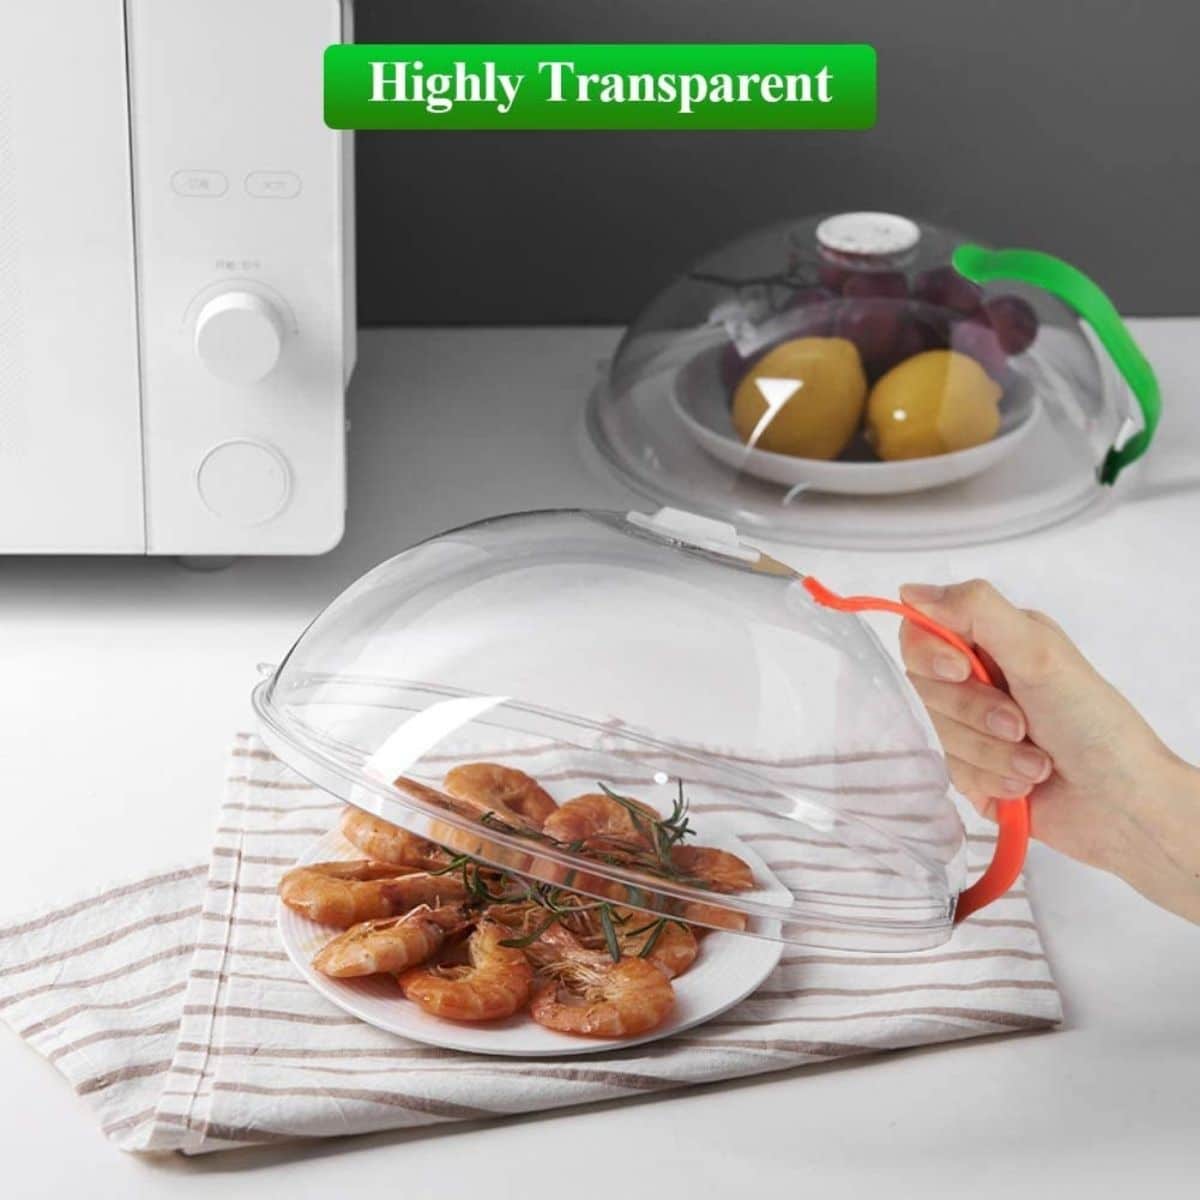 https://canyoumicrowavethis.com/wp-content/uploads/2020/12/best-microwave-cover-featured.jpg